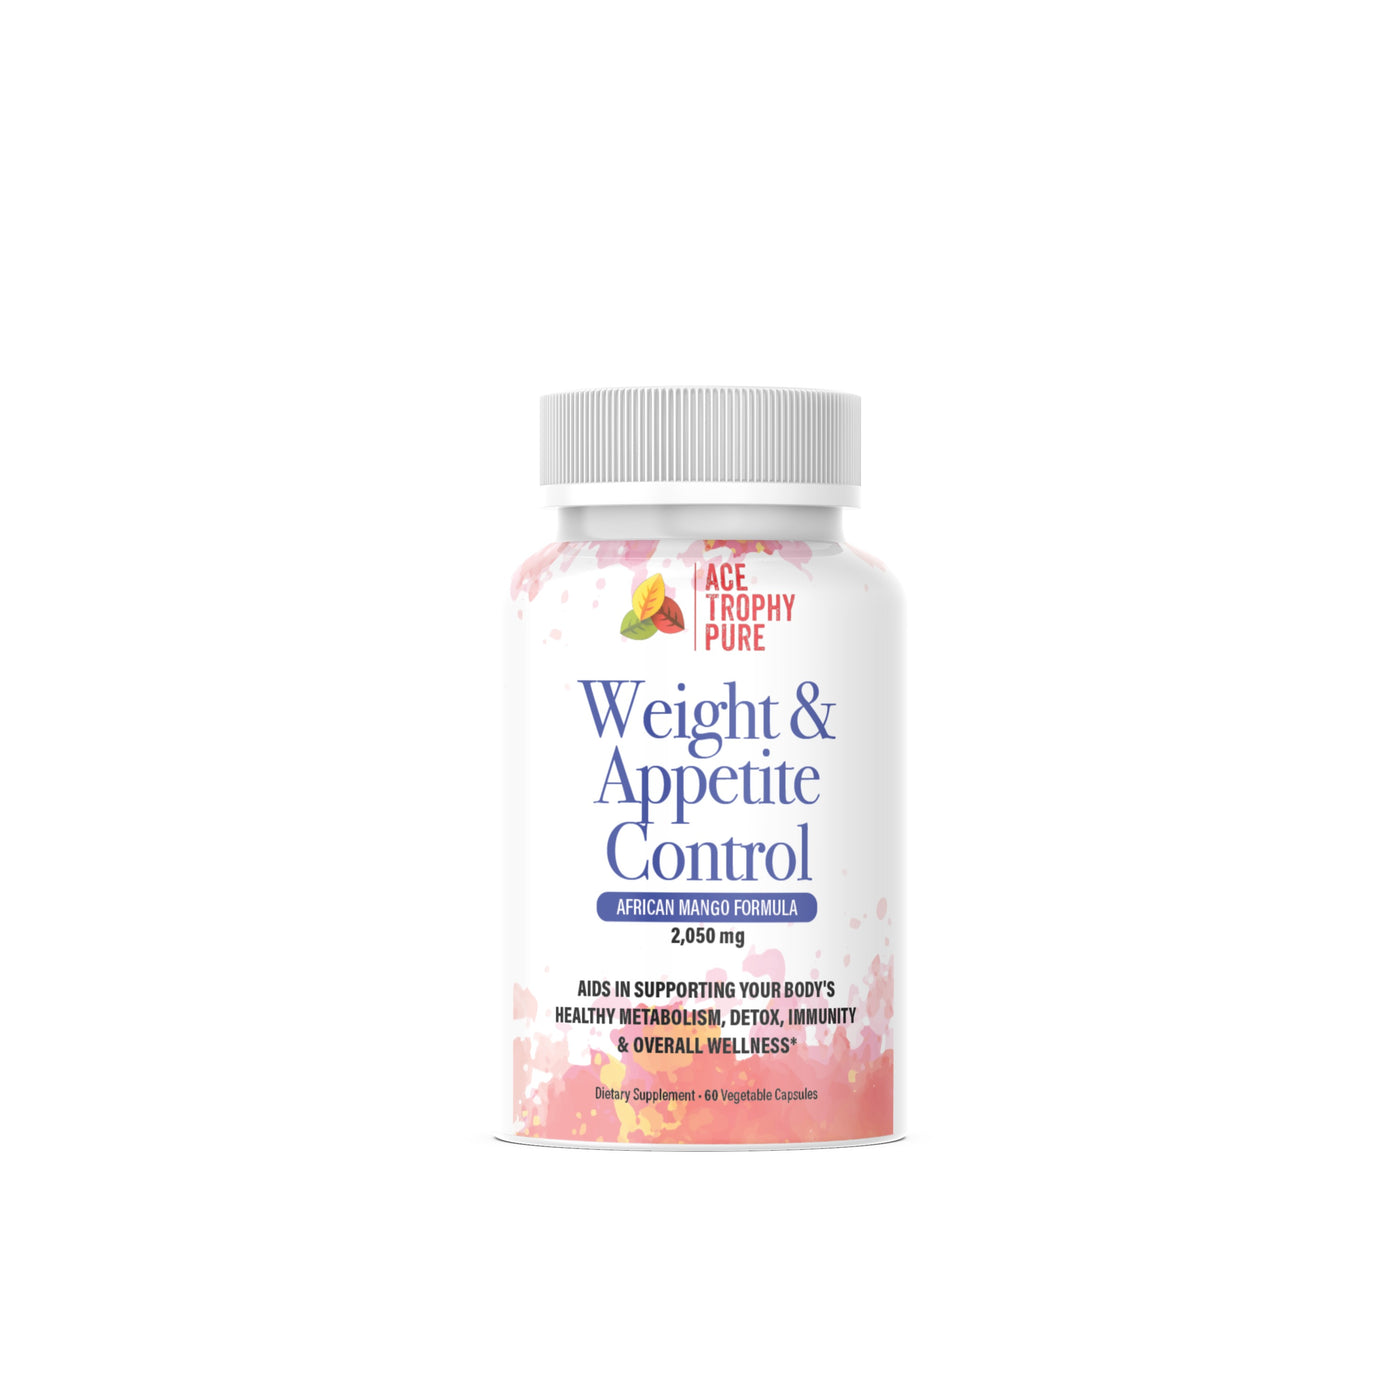 Weight & Appetite Control